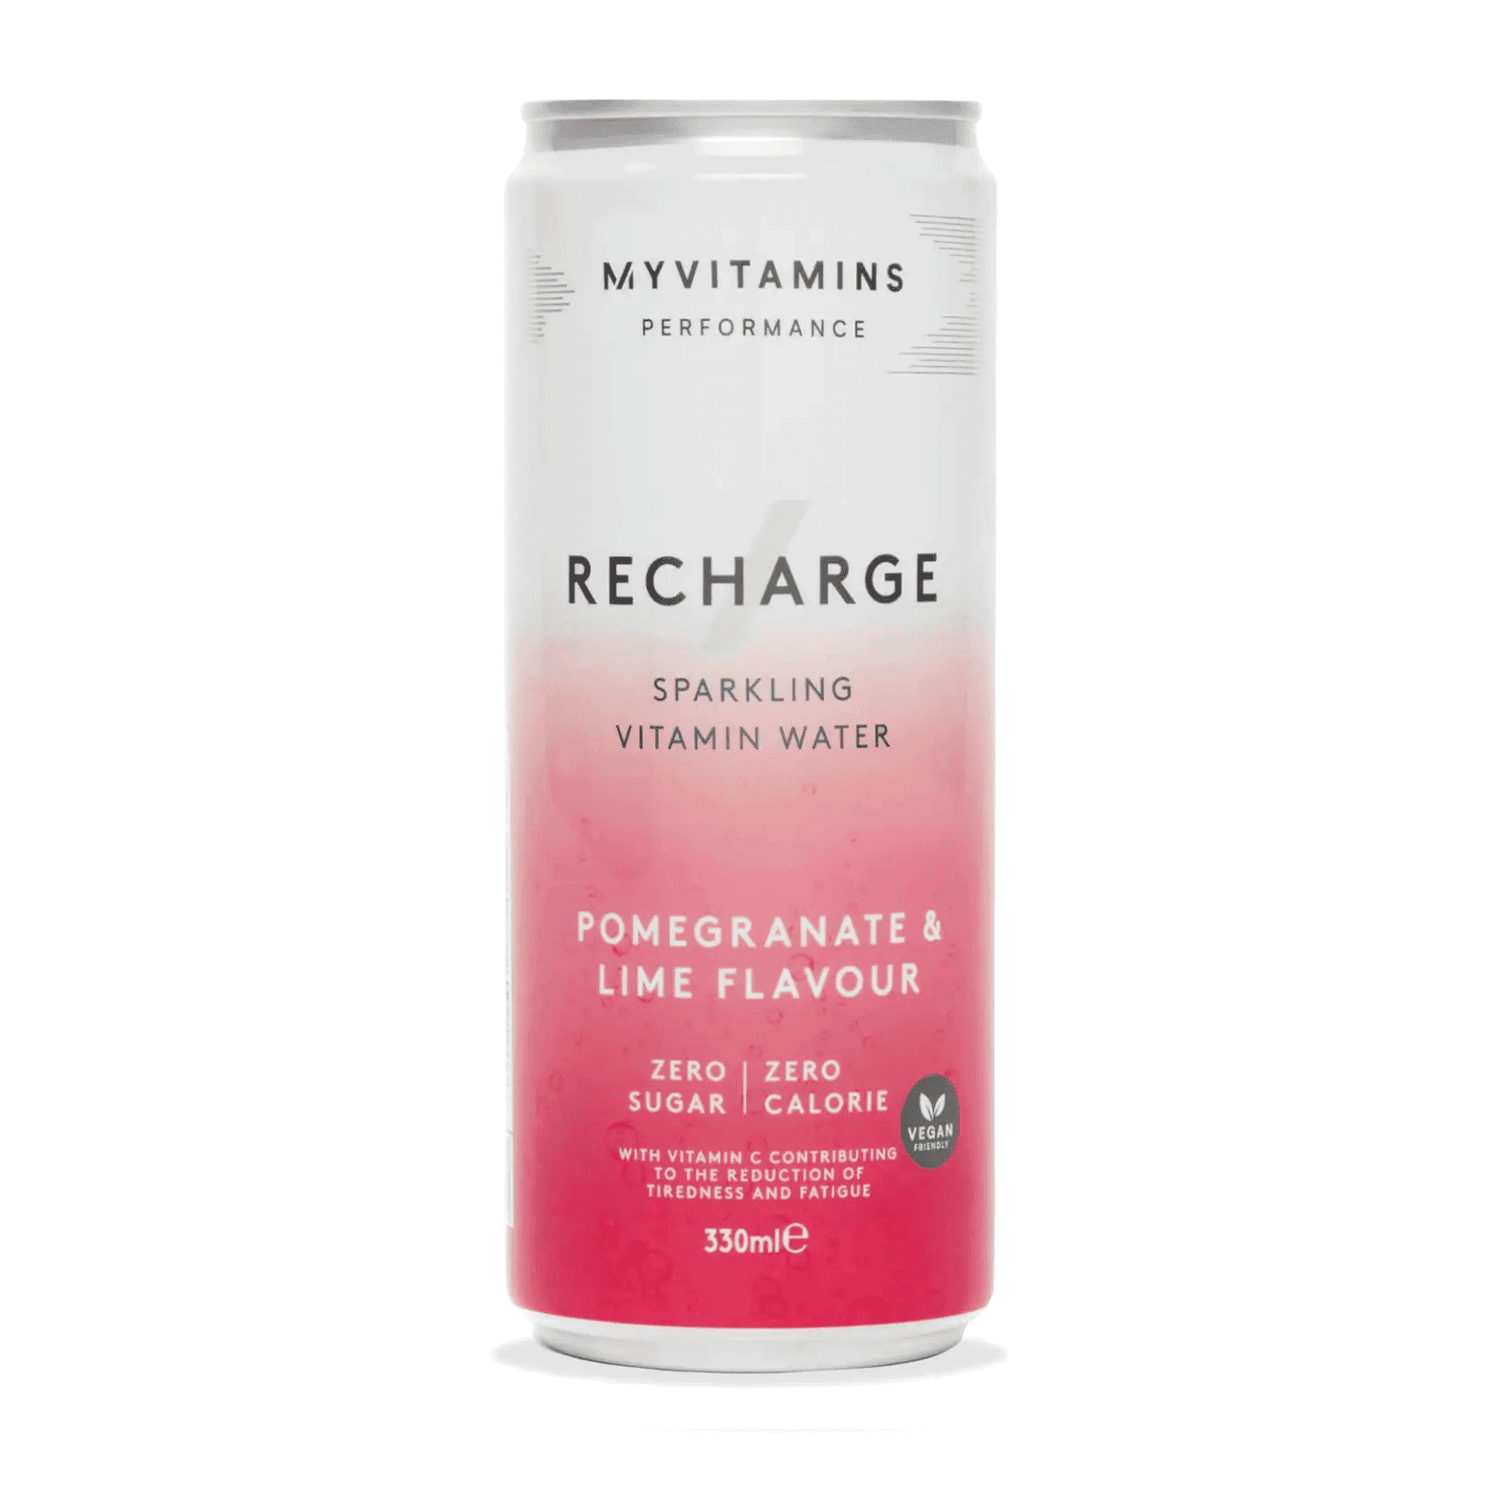 „Recharge RTD“ - Pomegranate & Lime